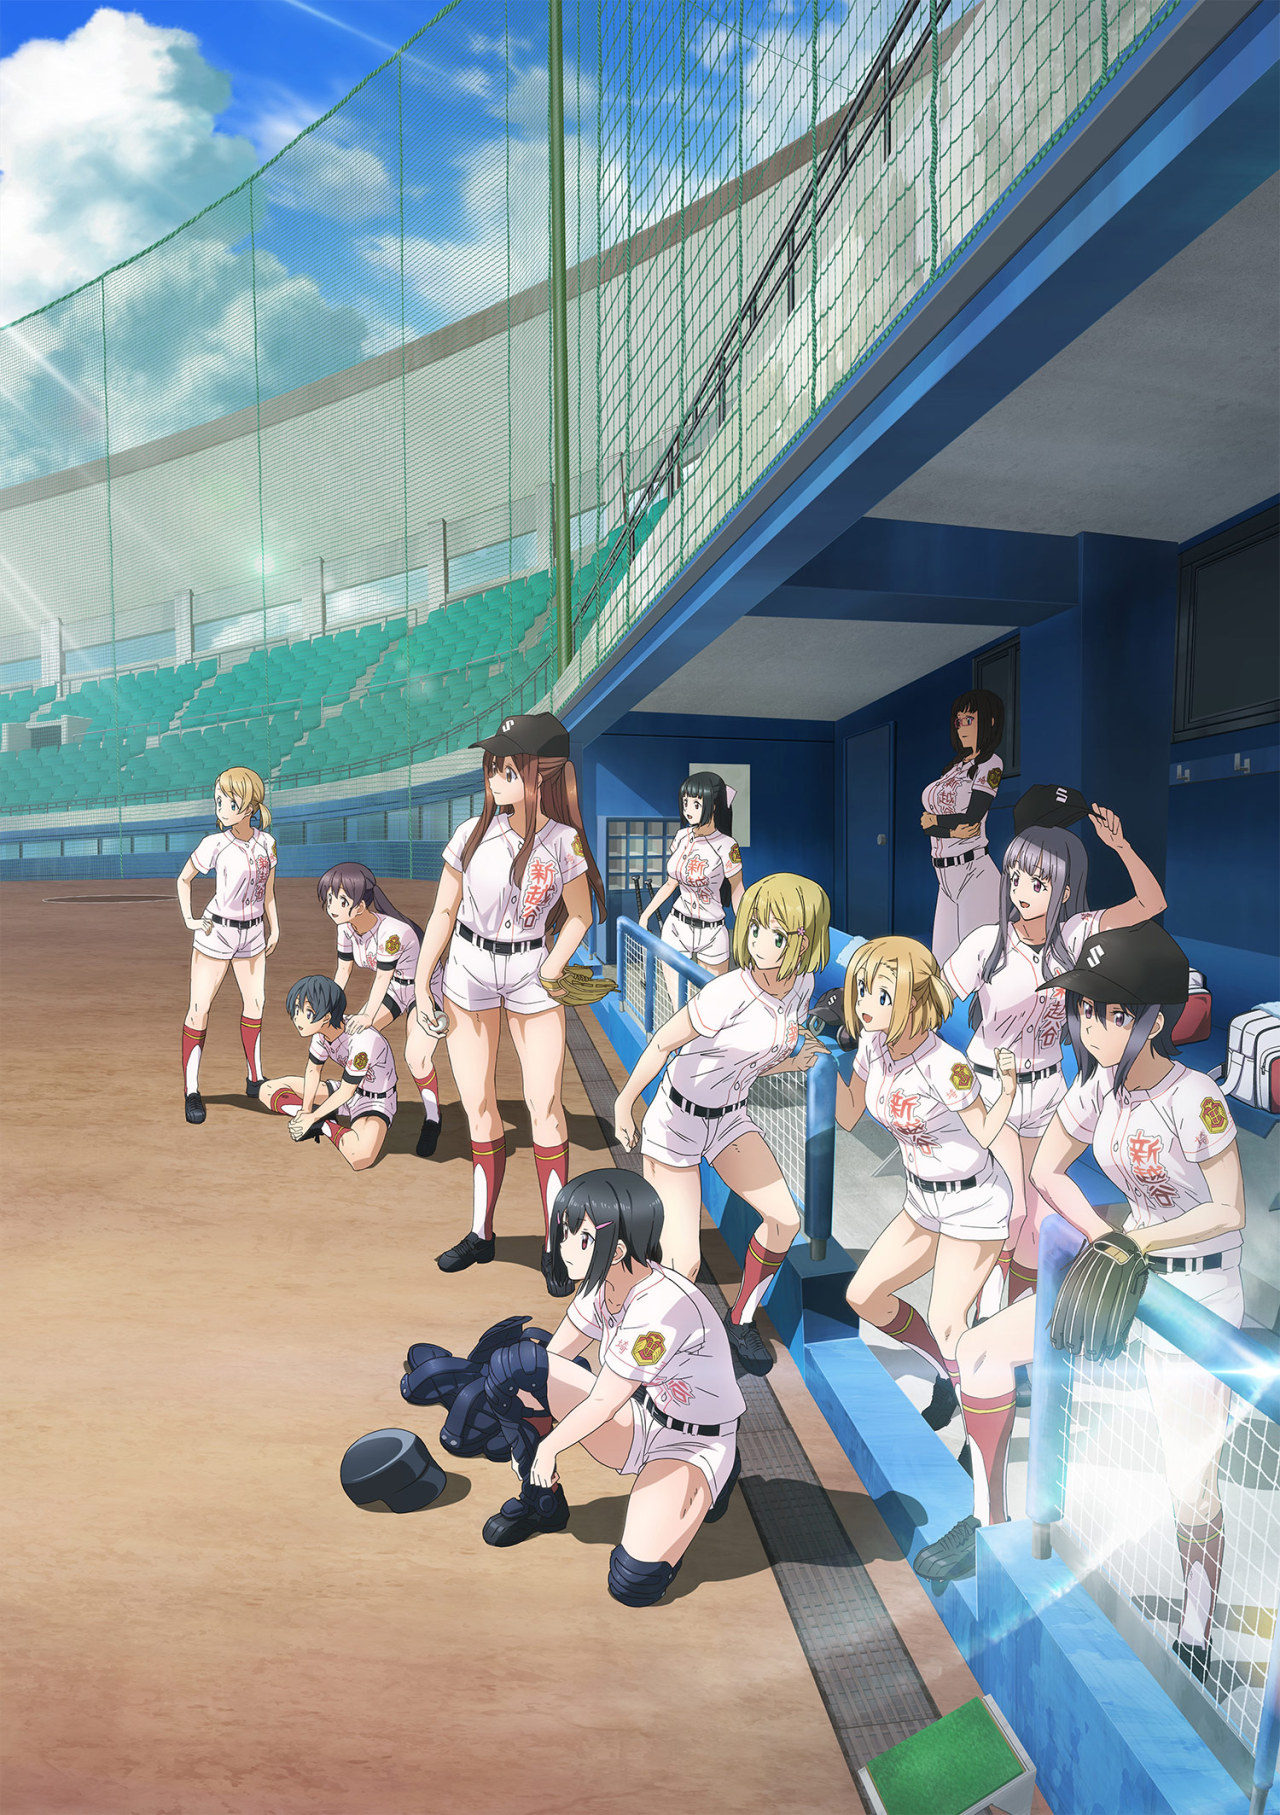 A new key visual for the upcoming sports TV anime series “Tamayomi” has been been published. It is slated to air in April 2020.
-Synopsis-““In her Junior High years, the pitcher Yomi Takeda was not able to get very far in a cross-school baseball...